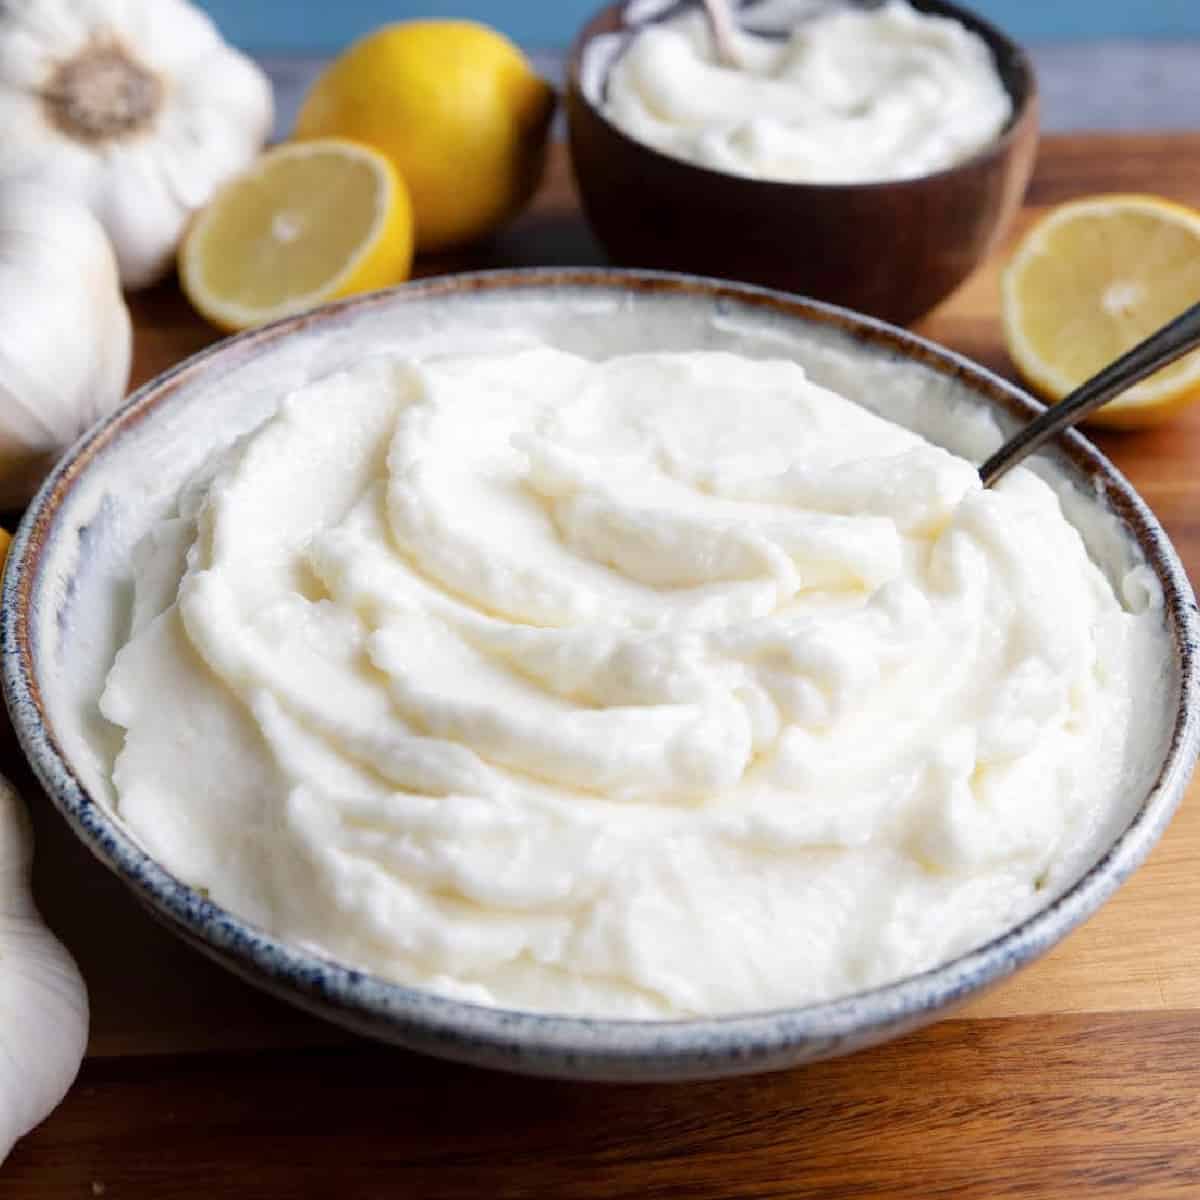 Lebanese garlic sauce, also known as toum is a rich and creamy sauce made with only 4 ingredients. It's dairy-free, vegan and ready in no time!